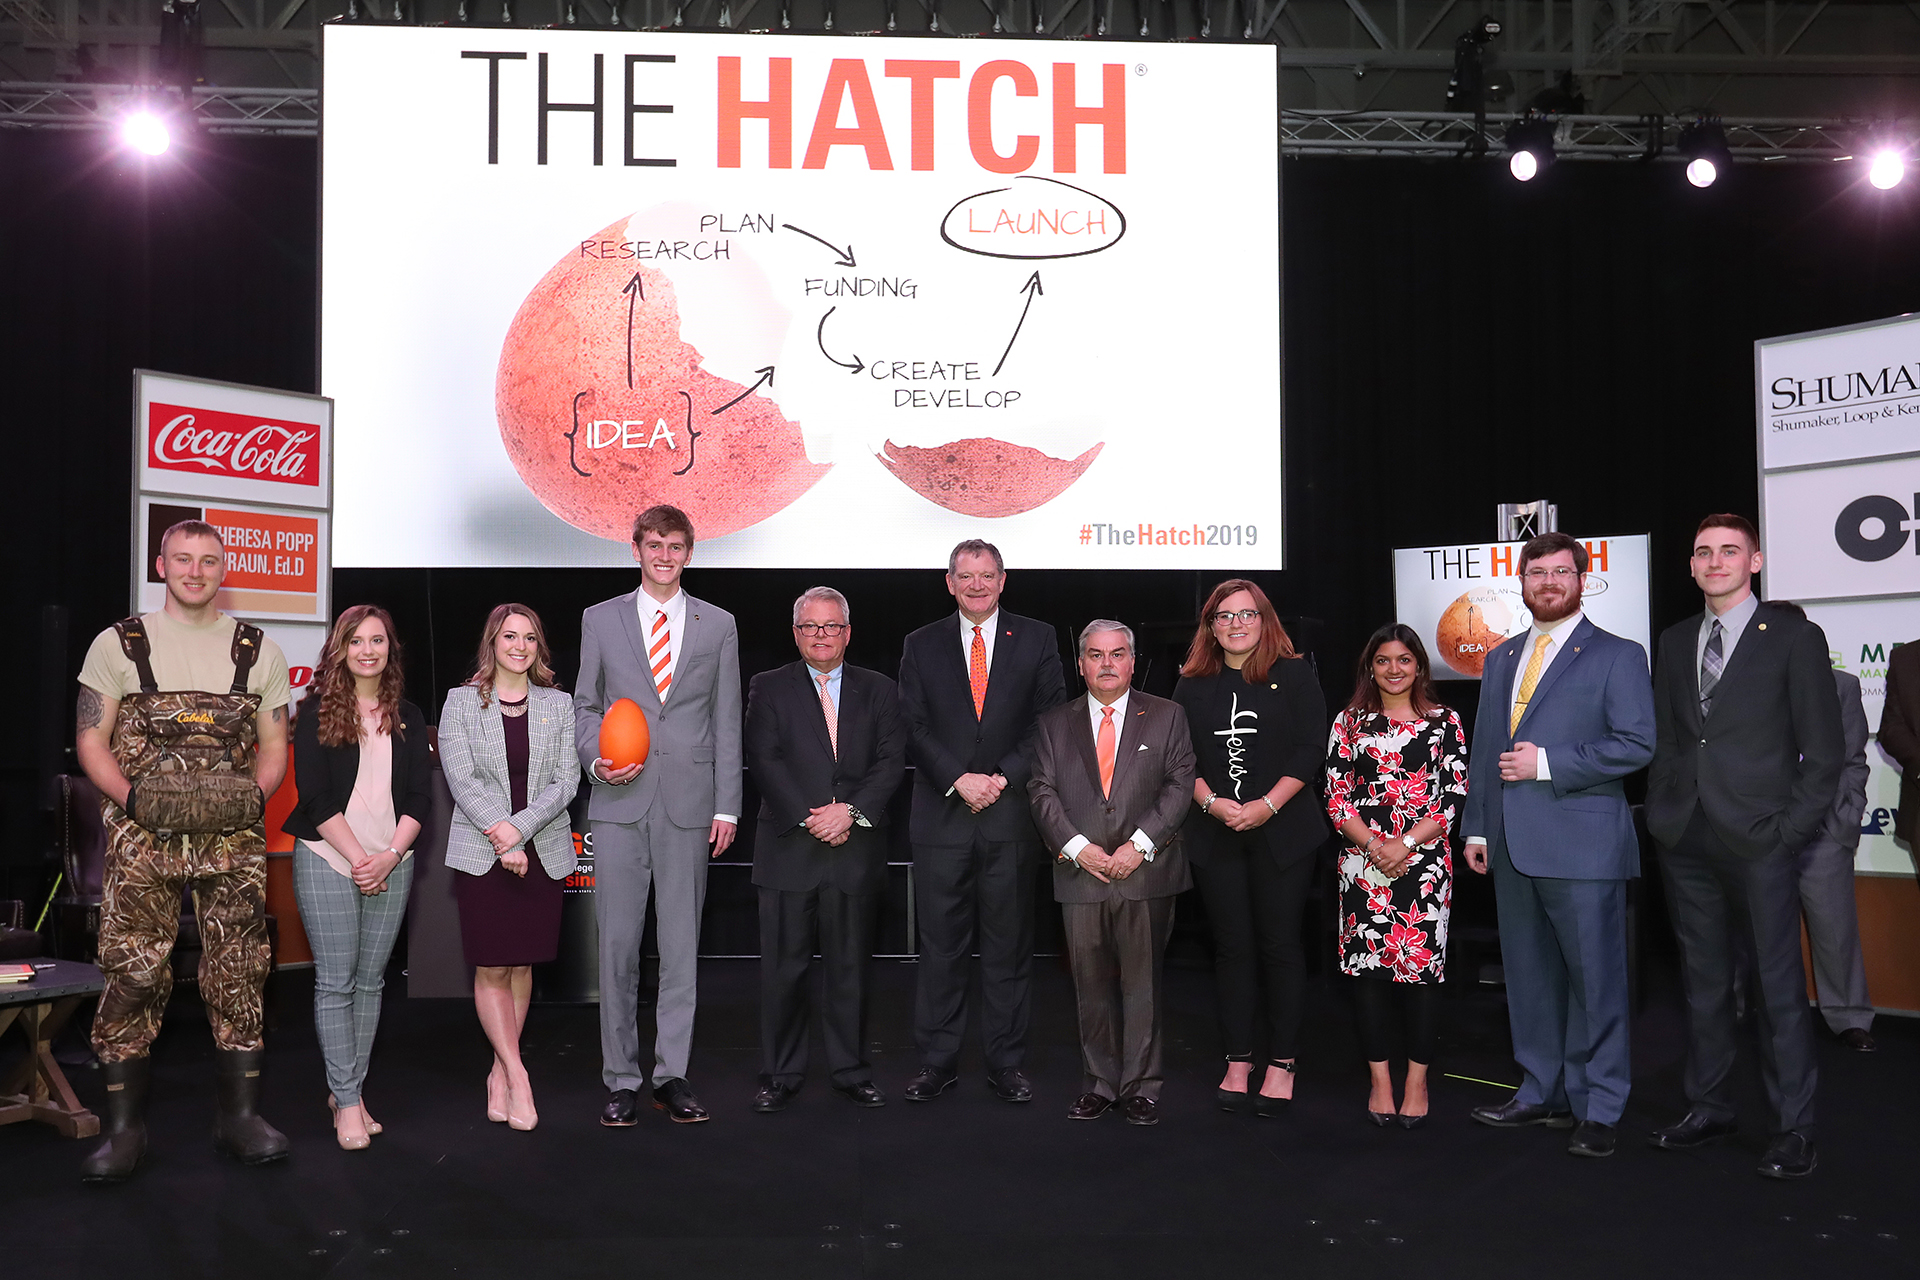 the hatch group image